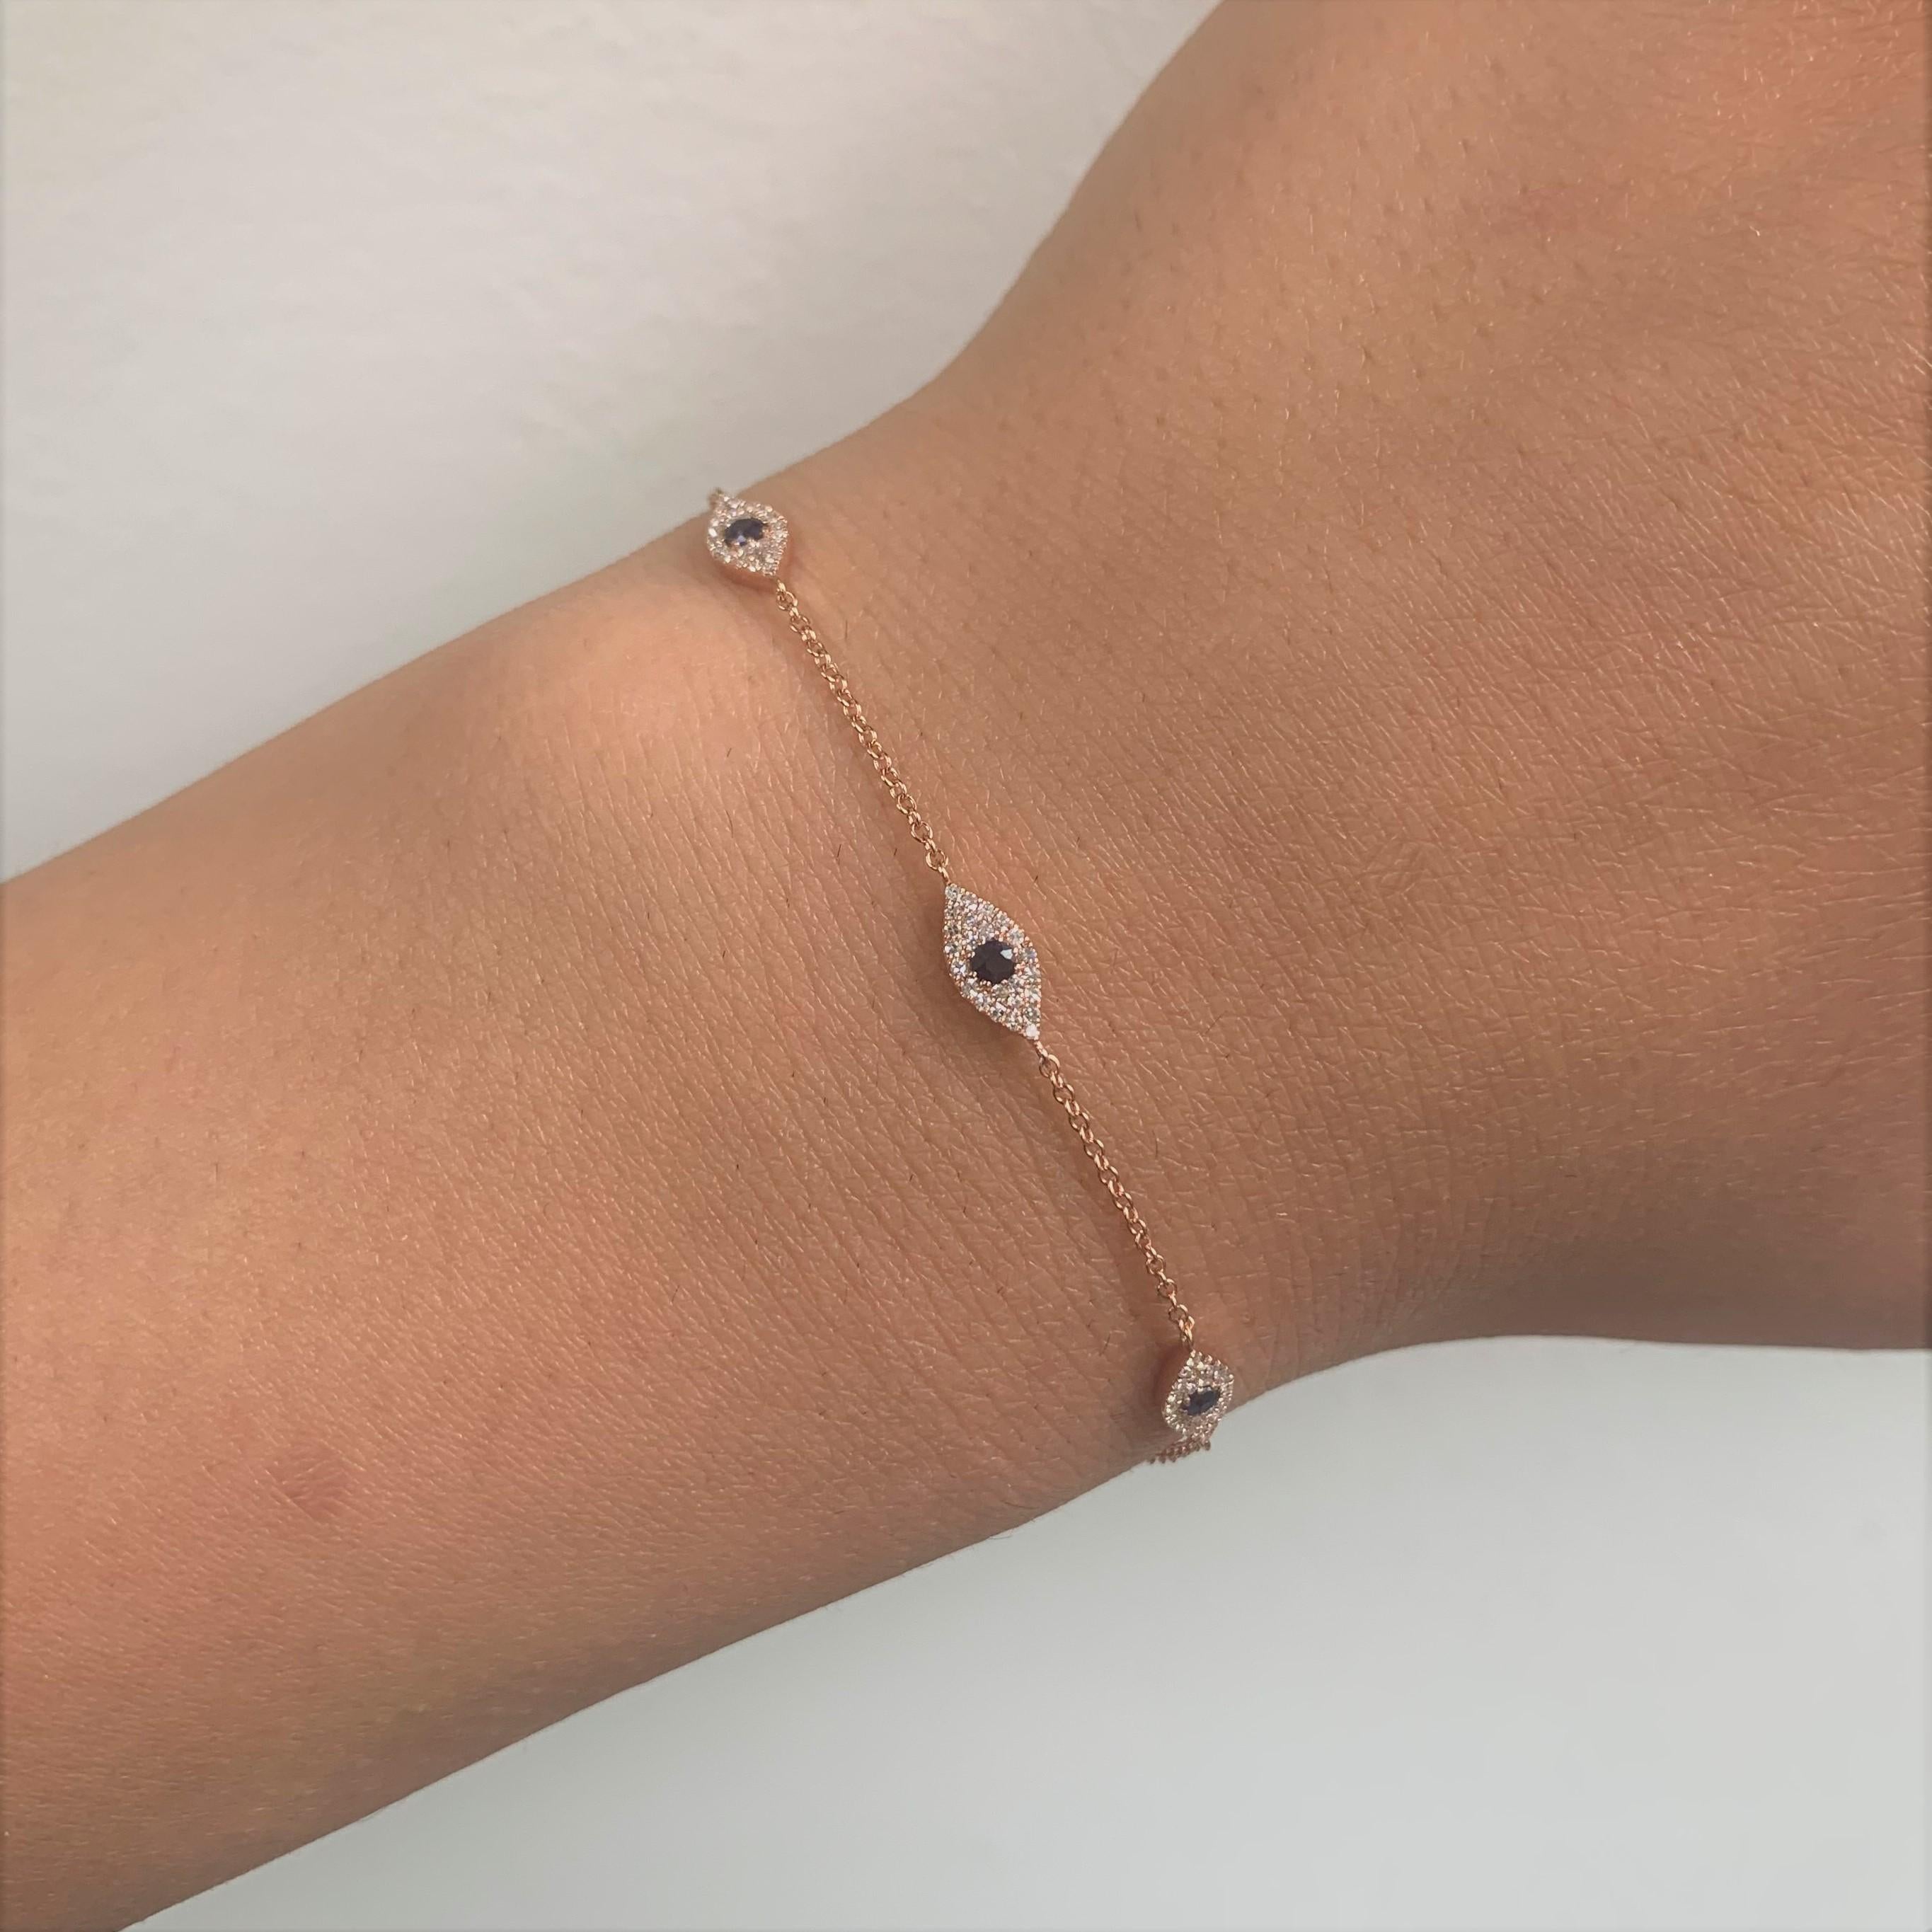 Add this station Evil Eye bracelet to your look! Crafted of 14k Gold and 0.26 ct. of Round Sparkly natural Diamonds and 0.27 ct. of shiny blue sapphires. Diamond Color and Clarity GH-SI1-SI2.  Bracelet is adjustable up to 7